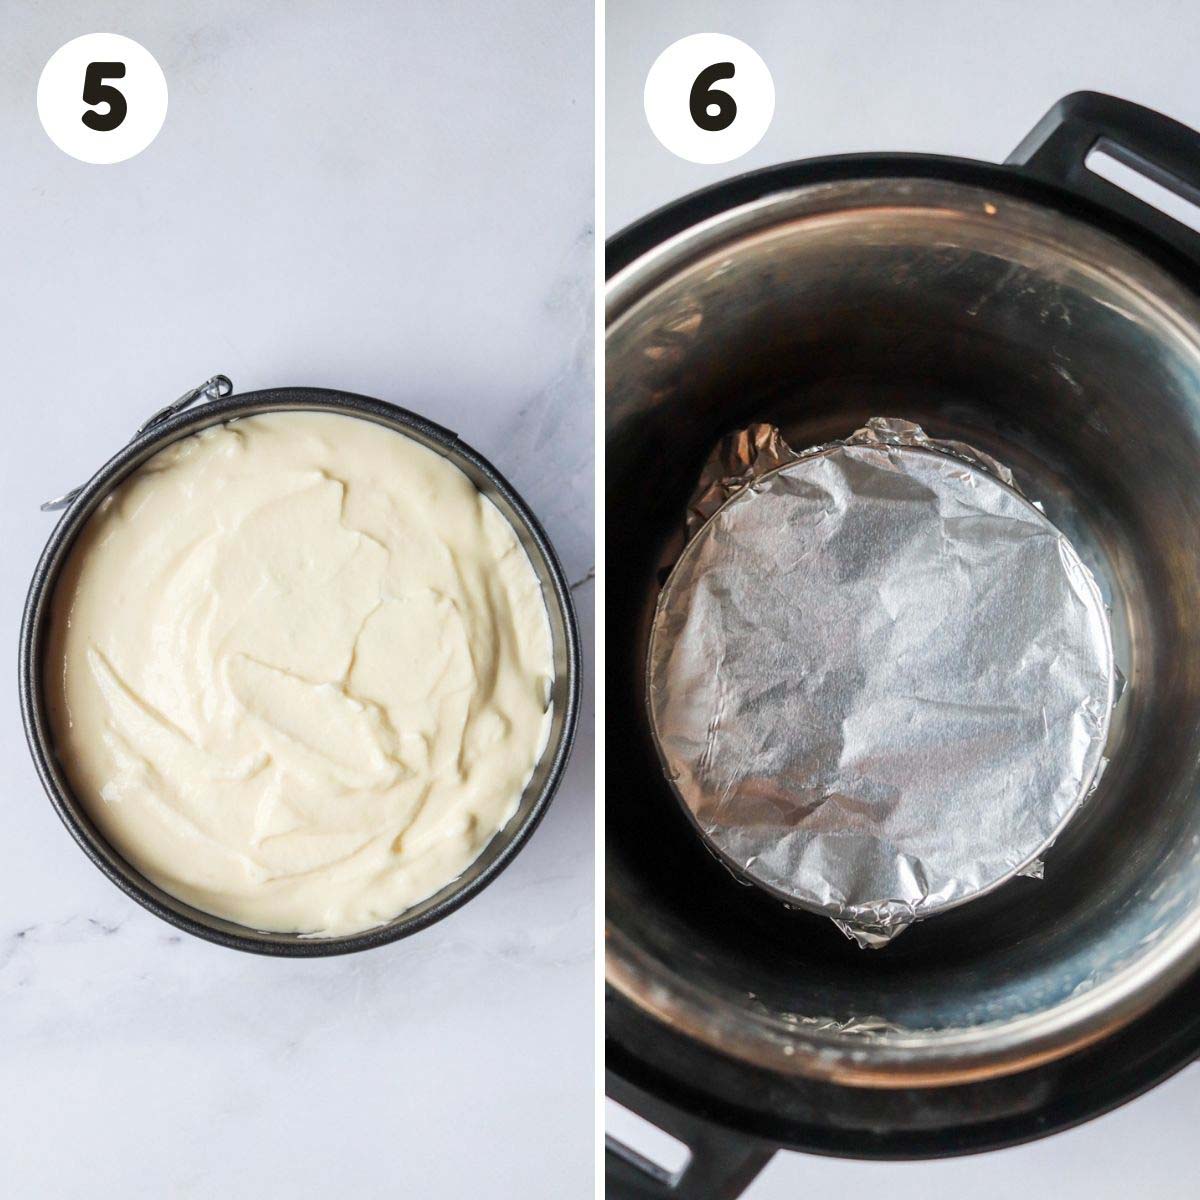 Steps to putting the cheesecake in the Instant Pot.